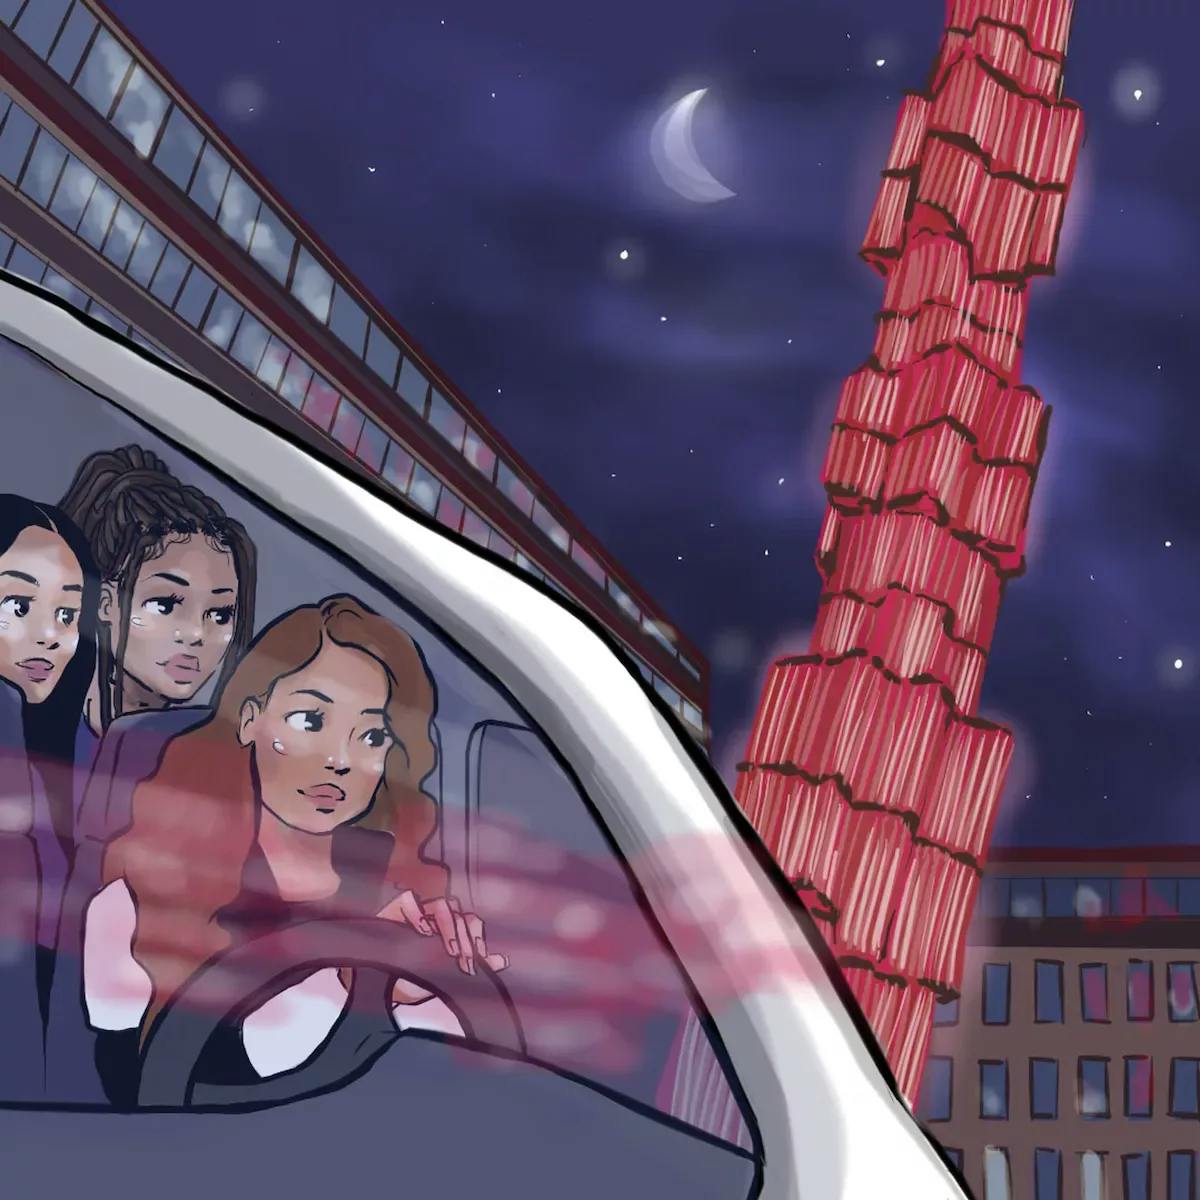 Animation of three girls in a car, driving at night